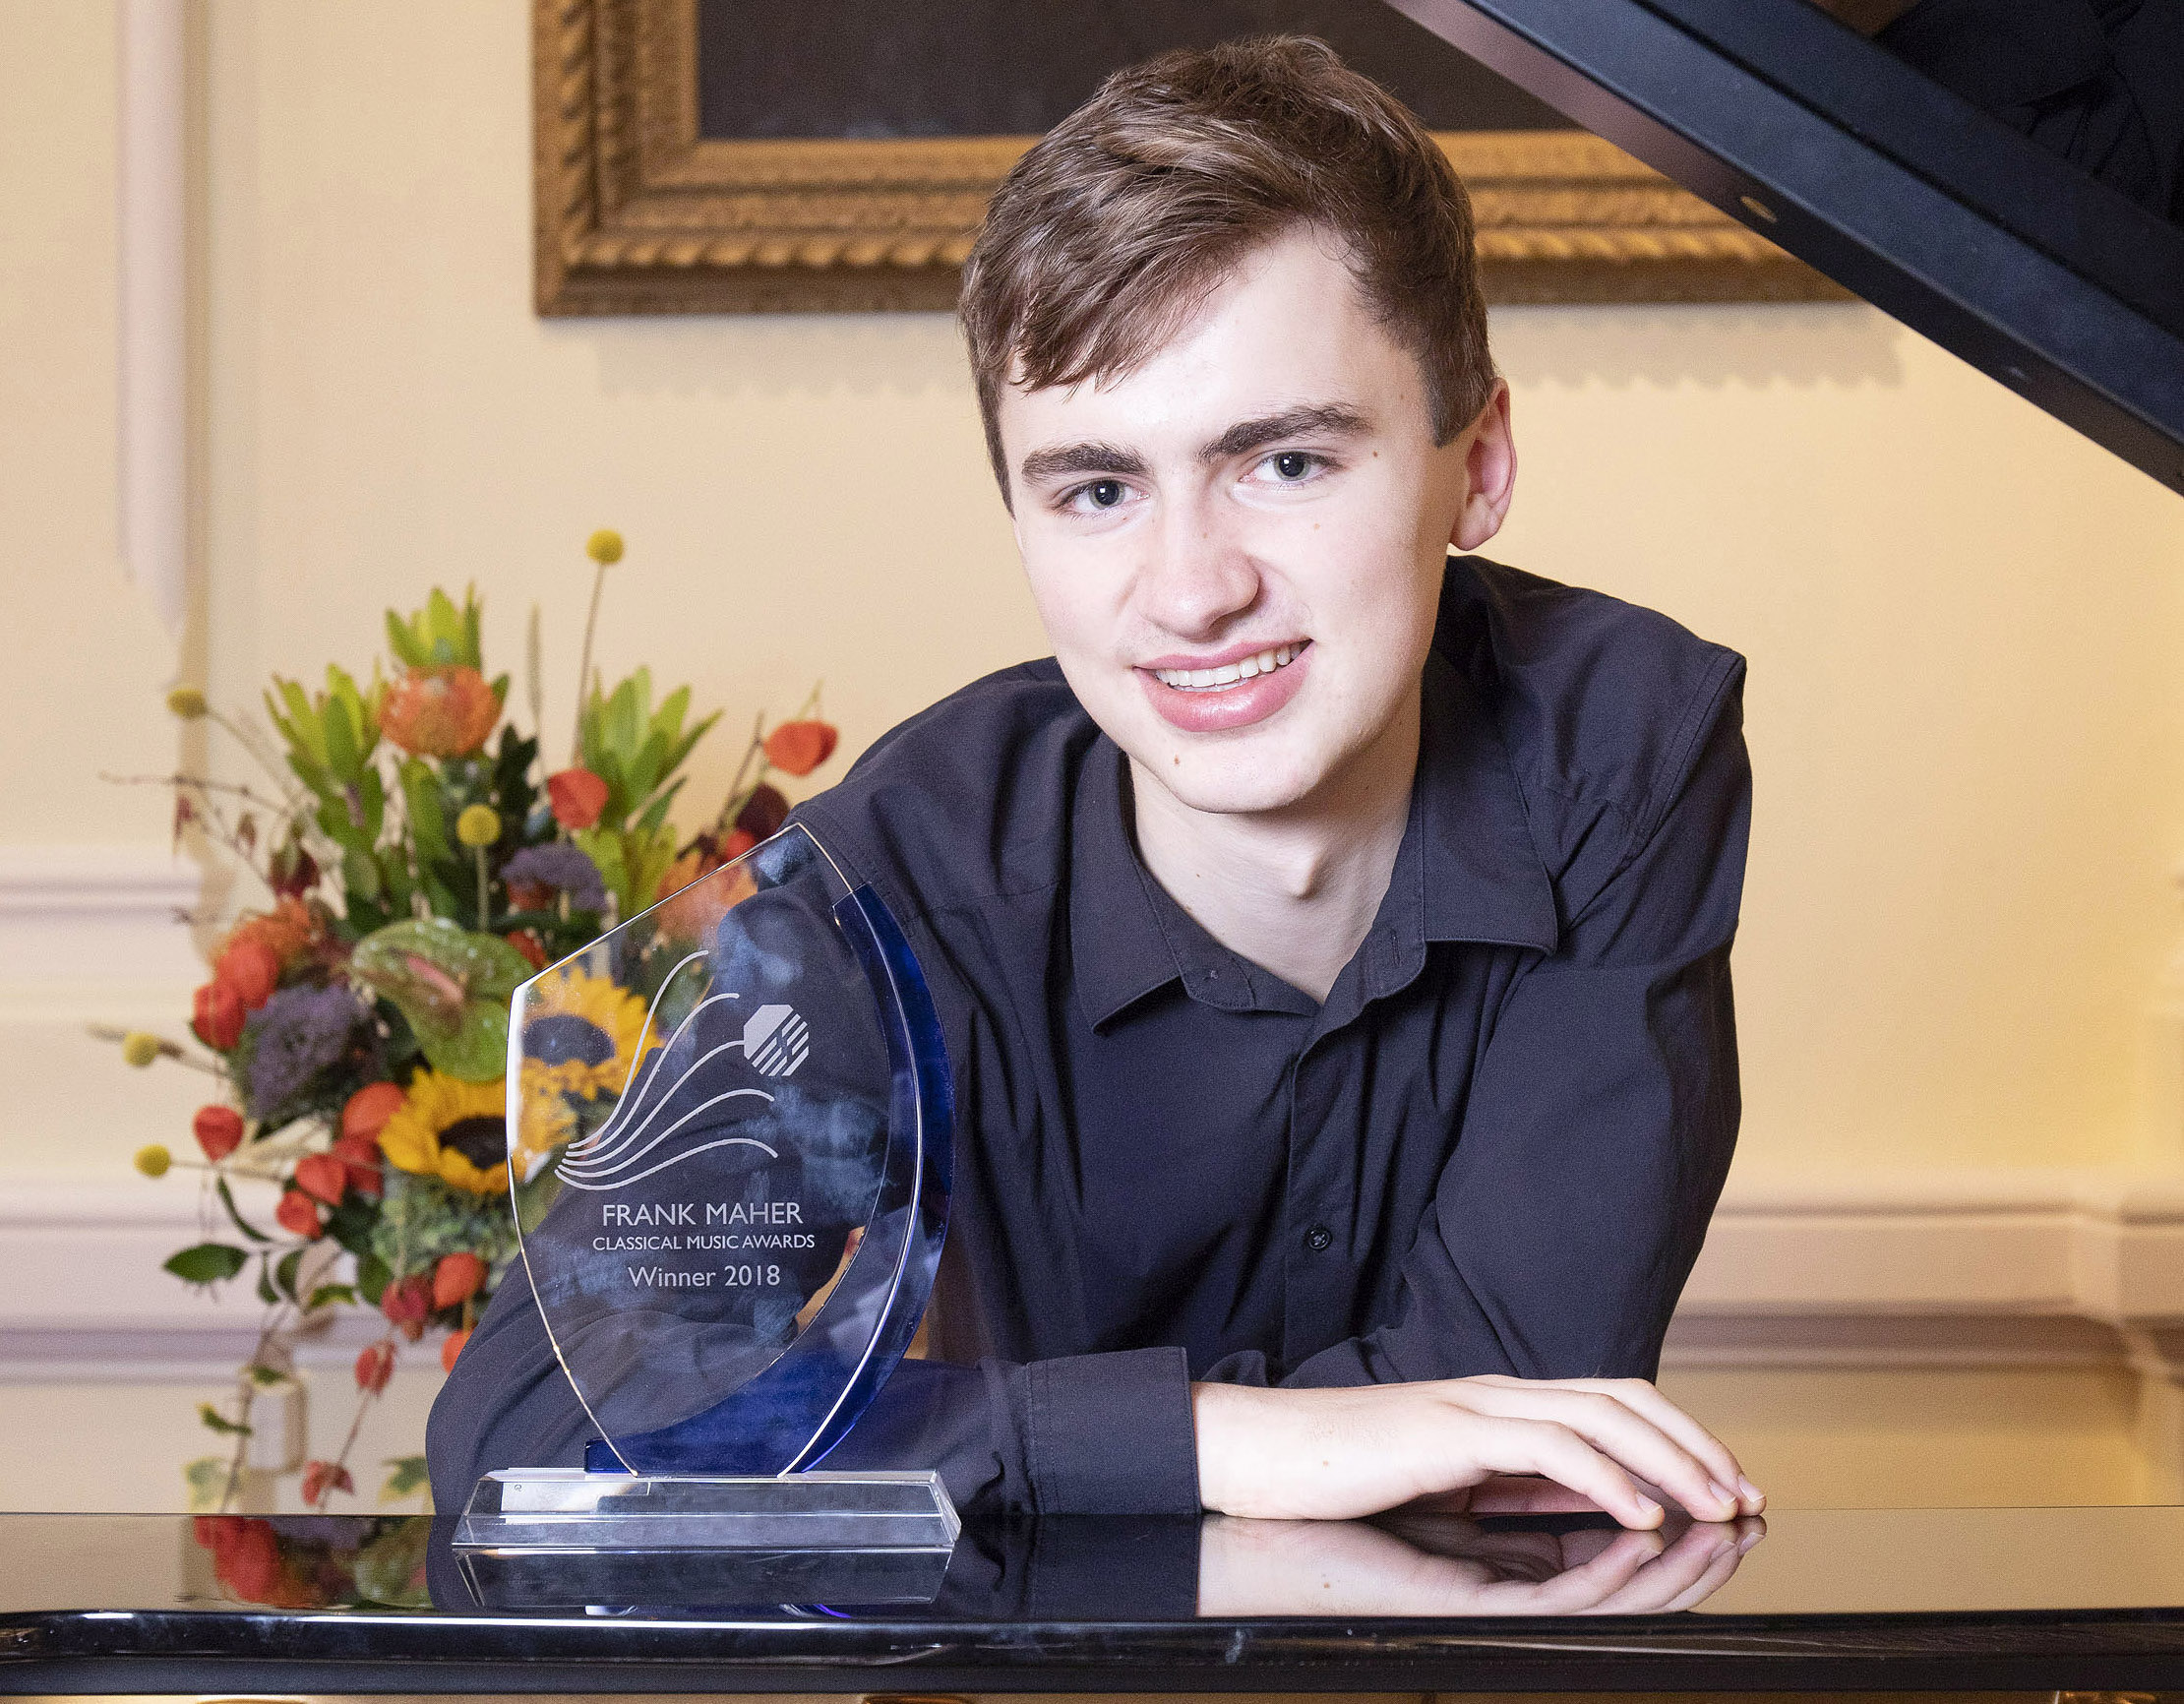 Kevin Jansson Wins €5,000 Prize at 2018 Frank Maher Classical Music Awards  